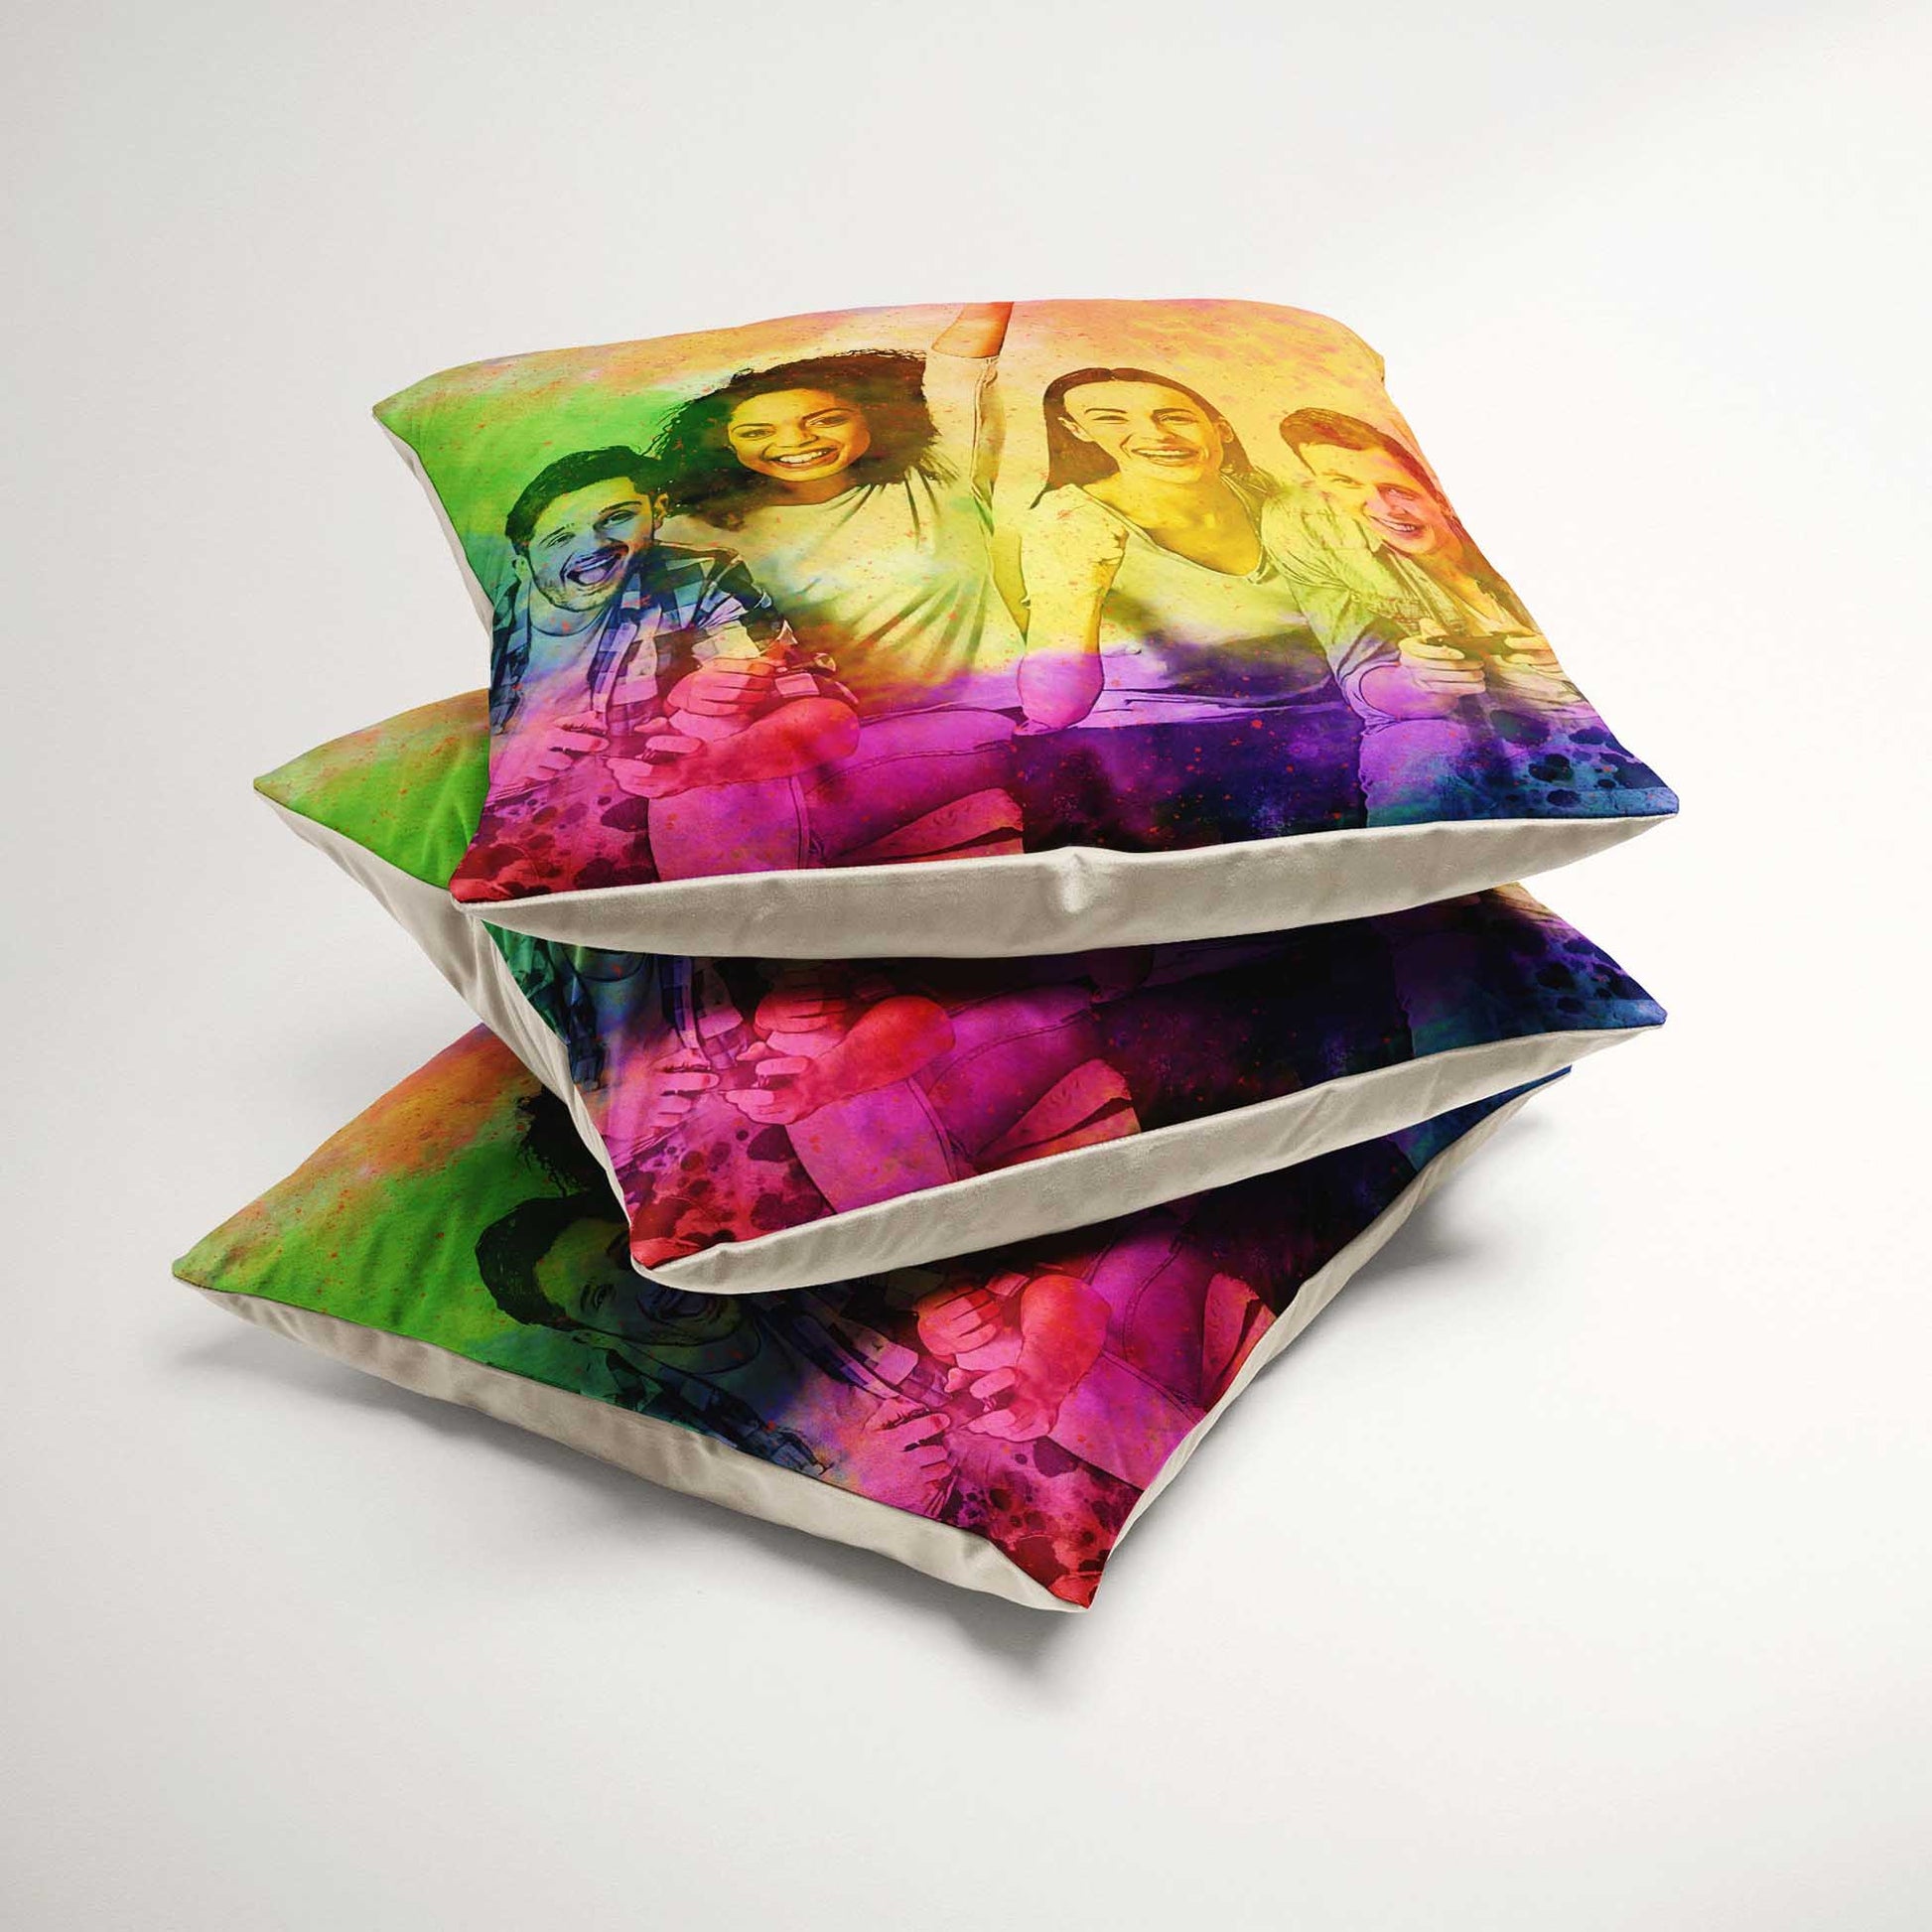 Capture the essence of your favorite photo with the Painting from Photo Personalised Splash of Colours Cushion. With its vivid hues of green, yellow, purple, and pink, it transforms ordinary moments into extraordinary works of art, handmade